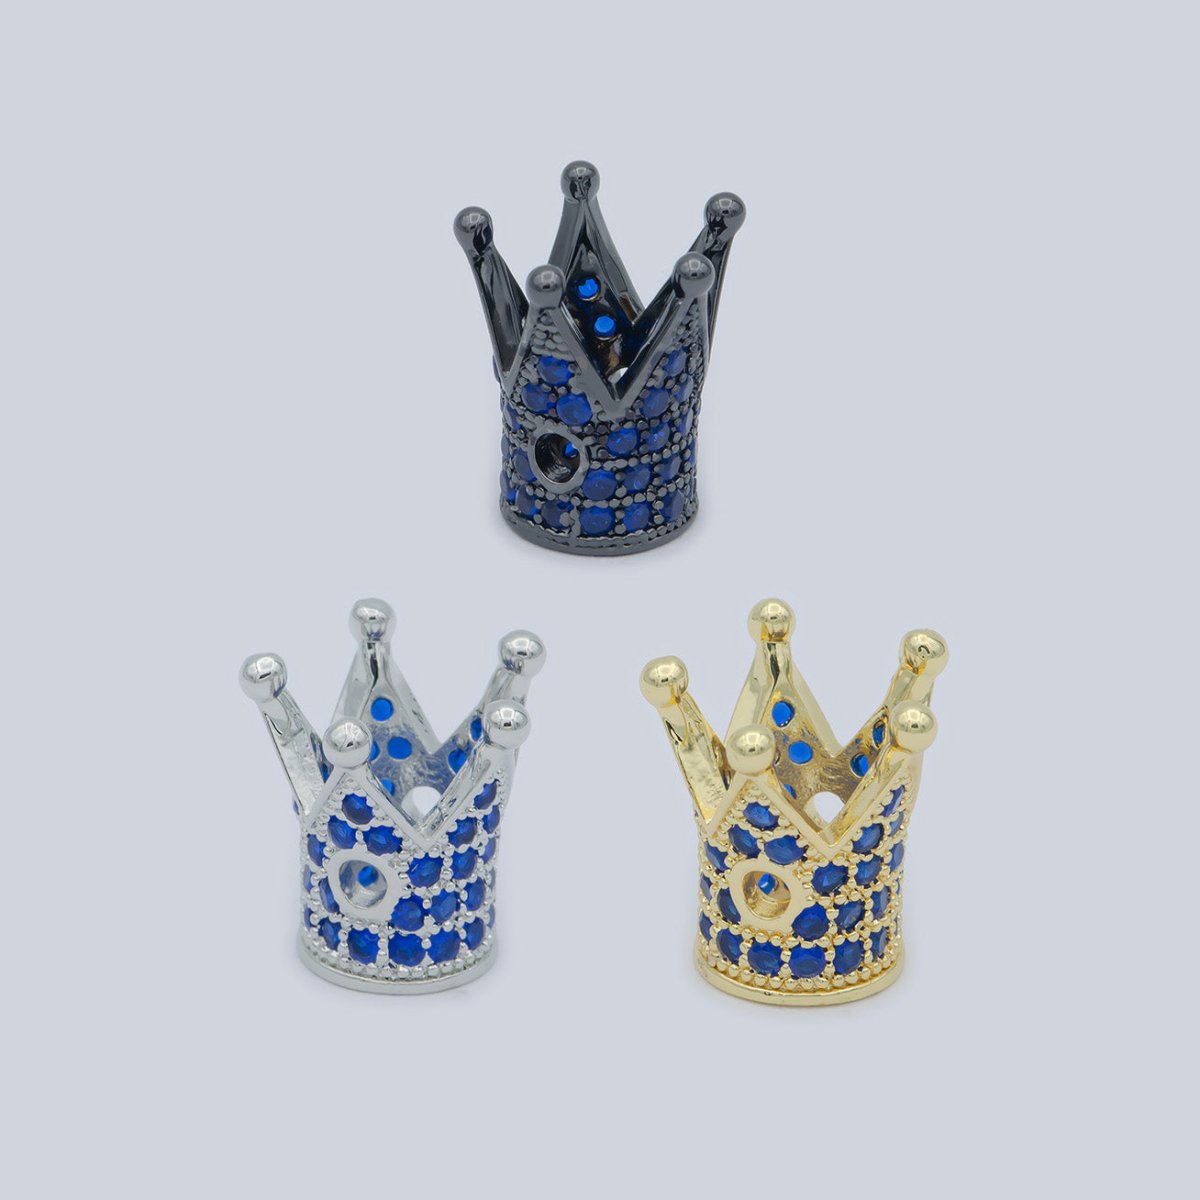 Mini Black Silver Gold Crown Beads with CZ Blue Crystal Small Simple King Queen Crown Model Jewelry Making Beads B-212, B-564, B-565 - DLUXCA